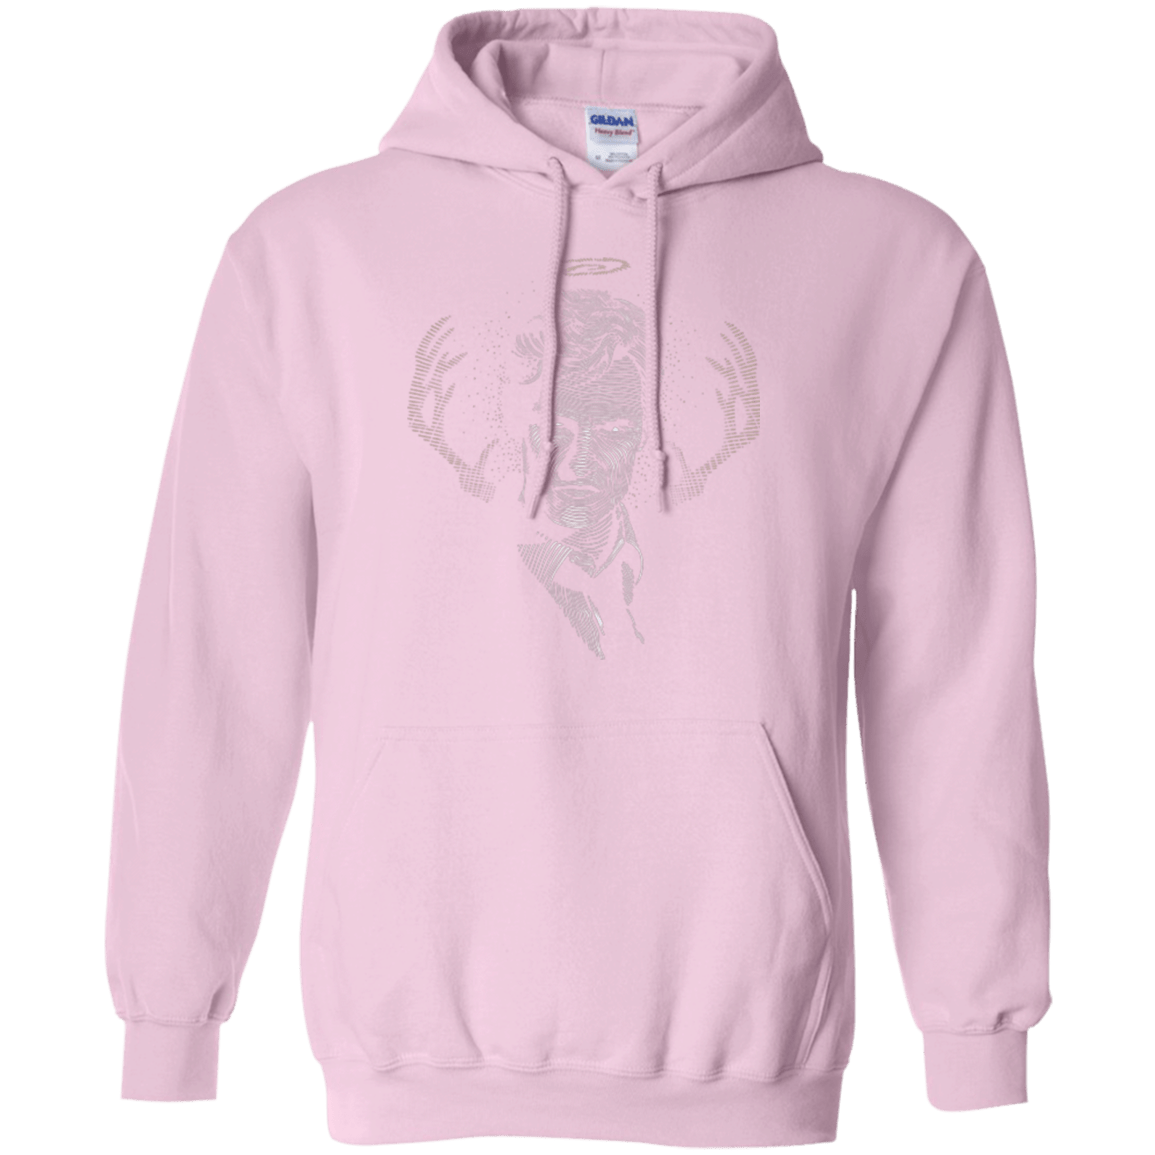 Sweatshirts Light Pink / Small The Detective Pullover Hoodie